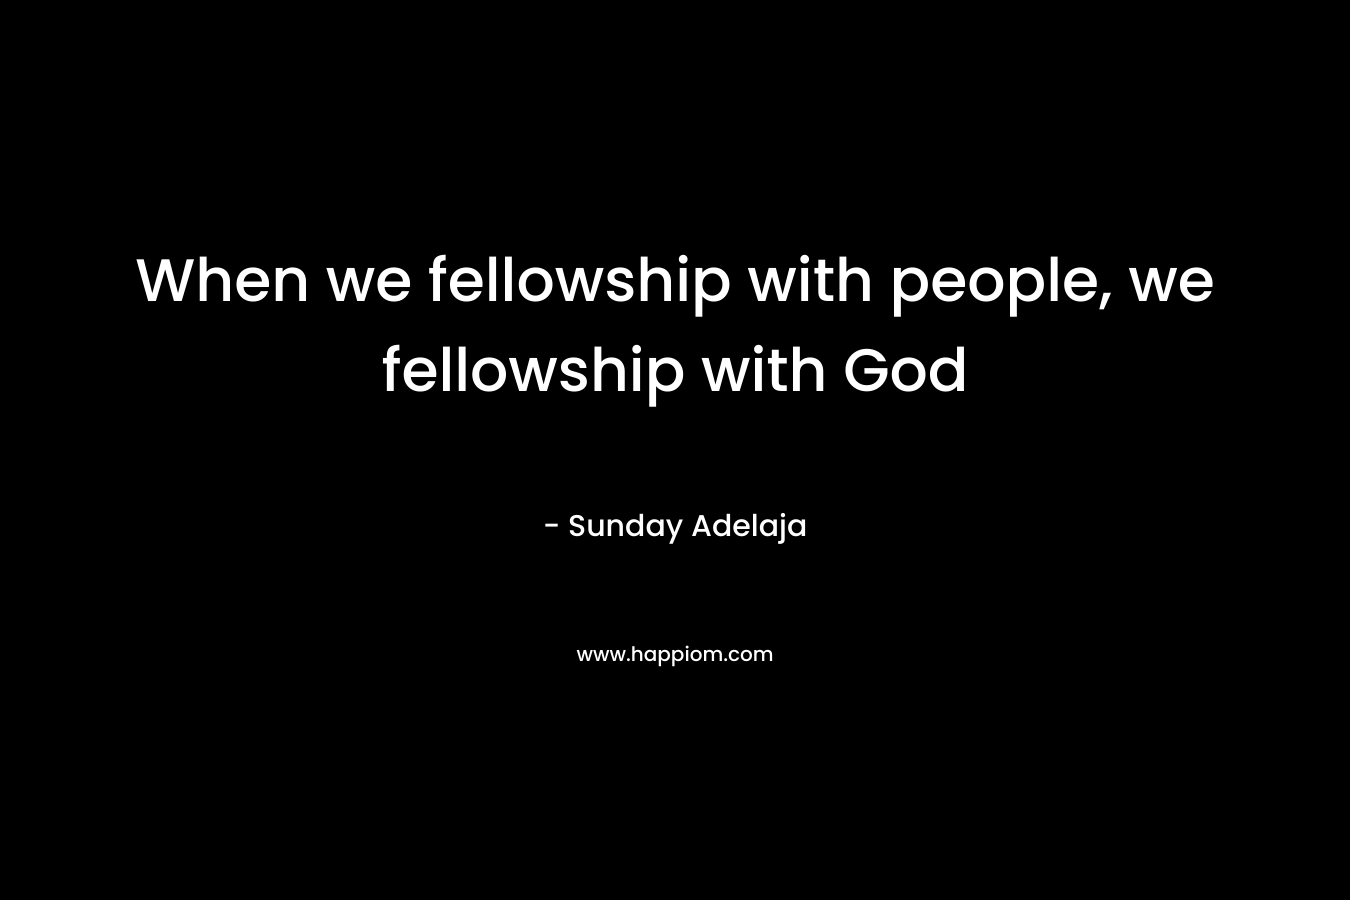 When we fellowship with people, we fellowship with God